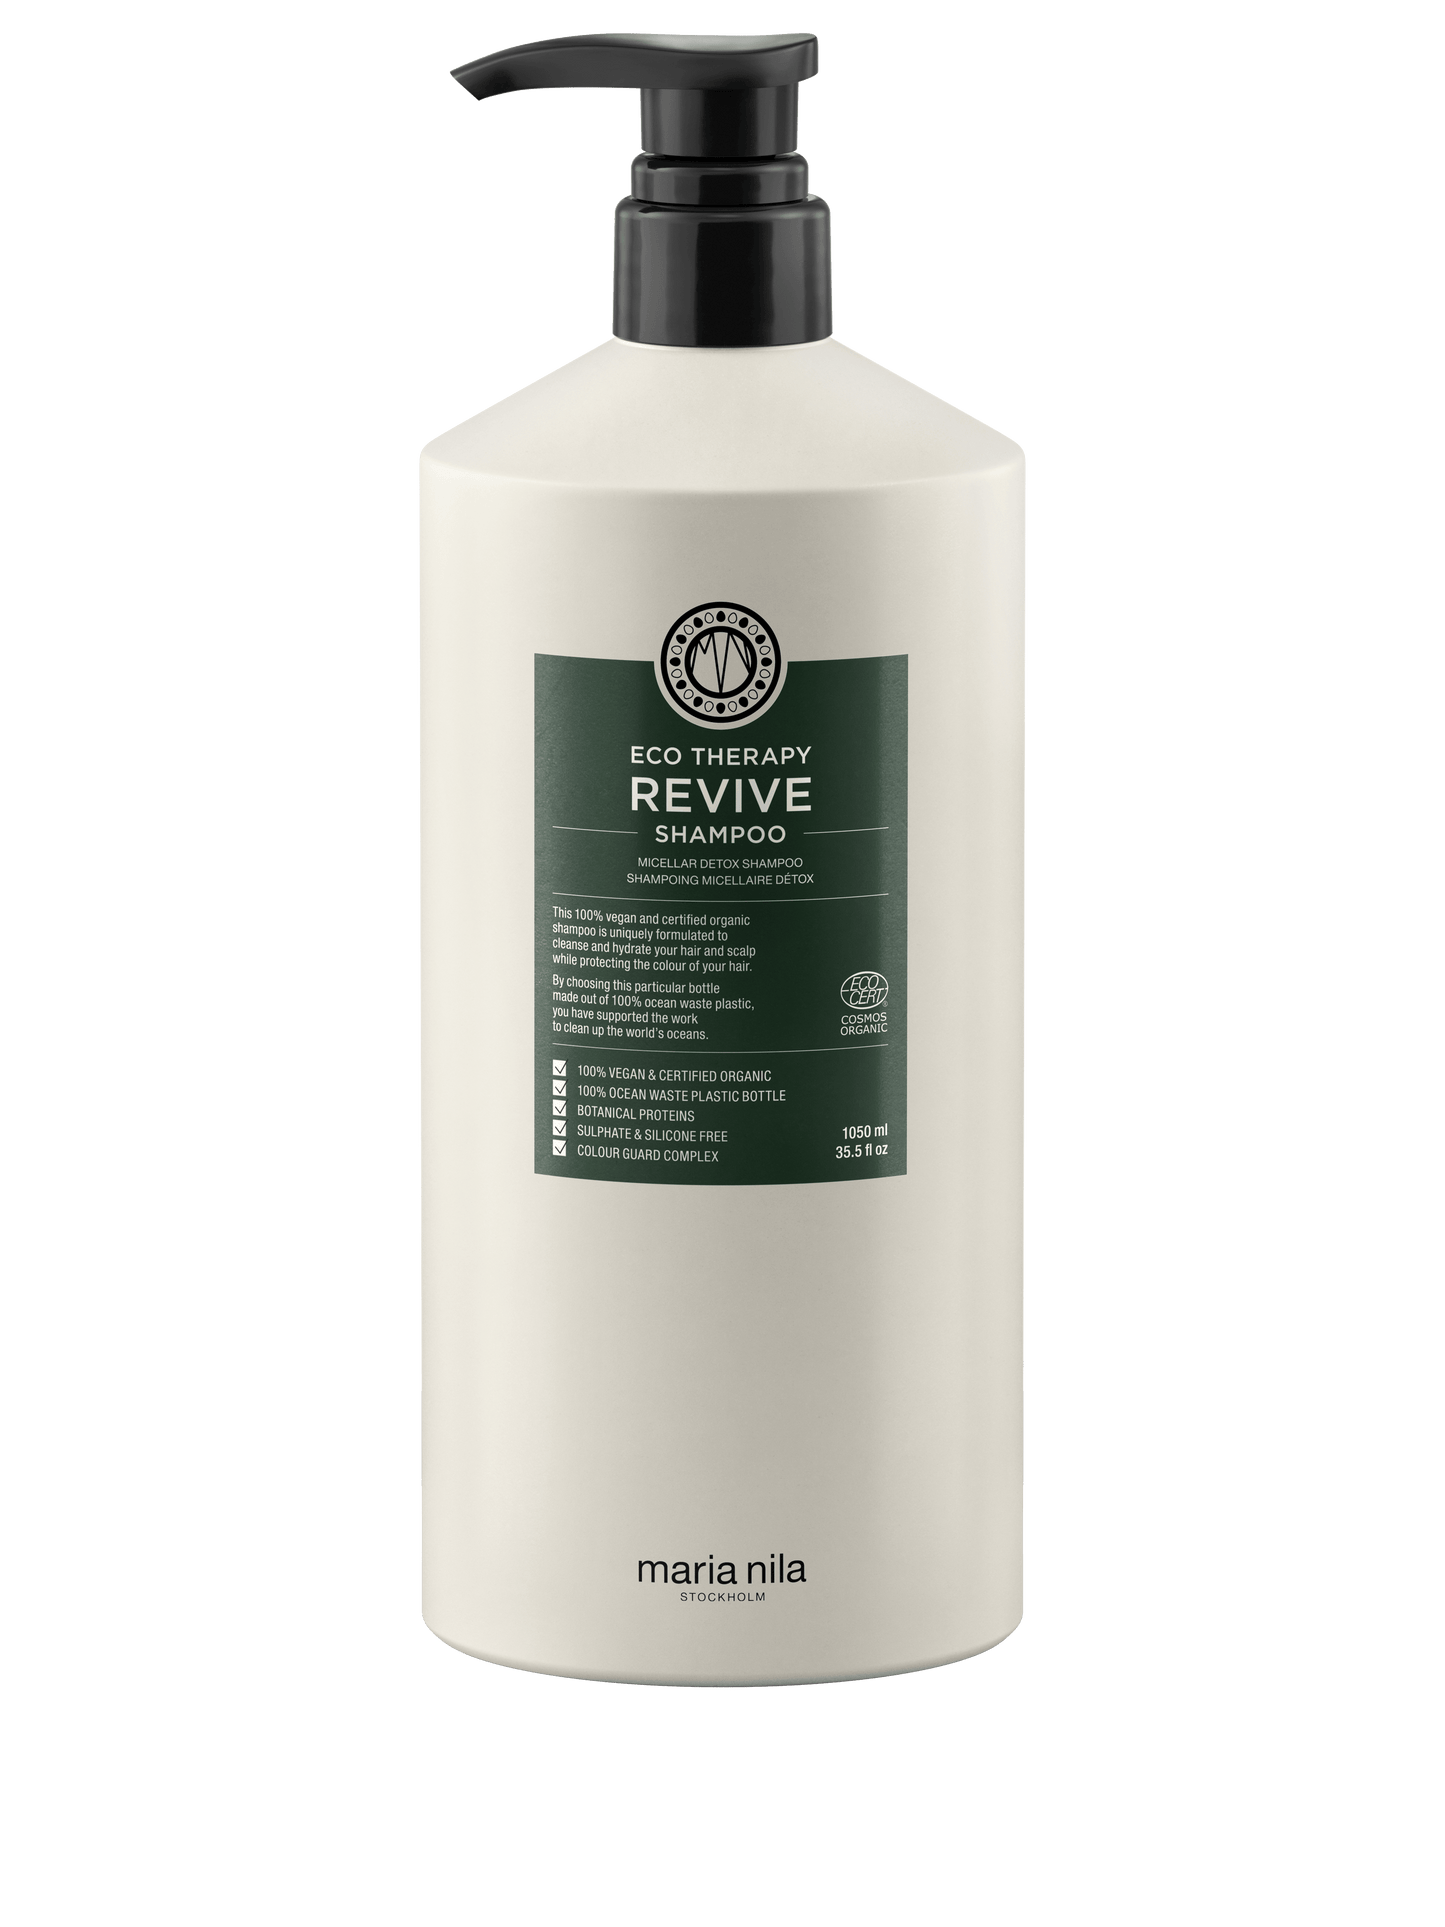 Eco Therapy Revive Shampoo - The Coloroom 